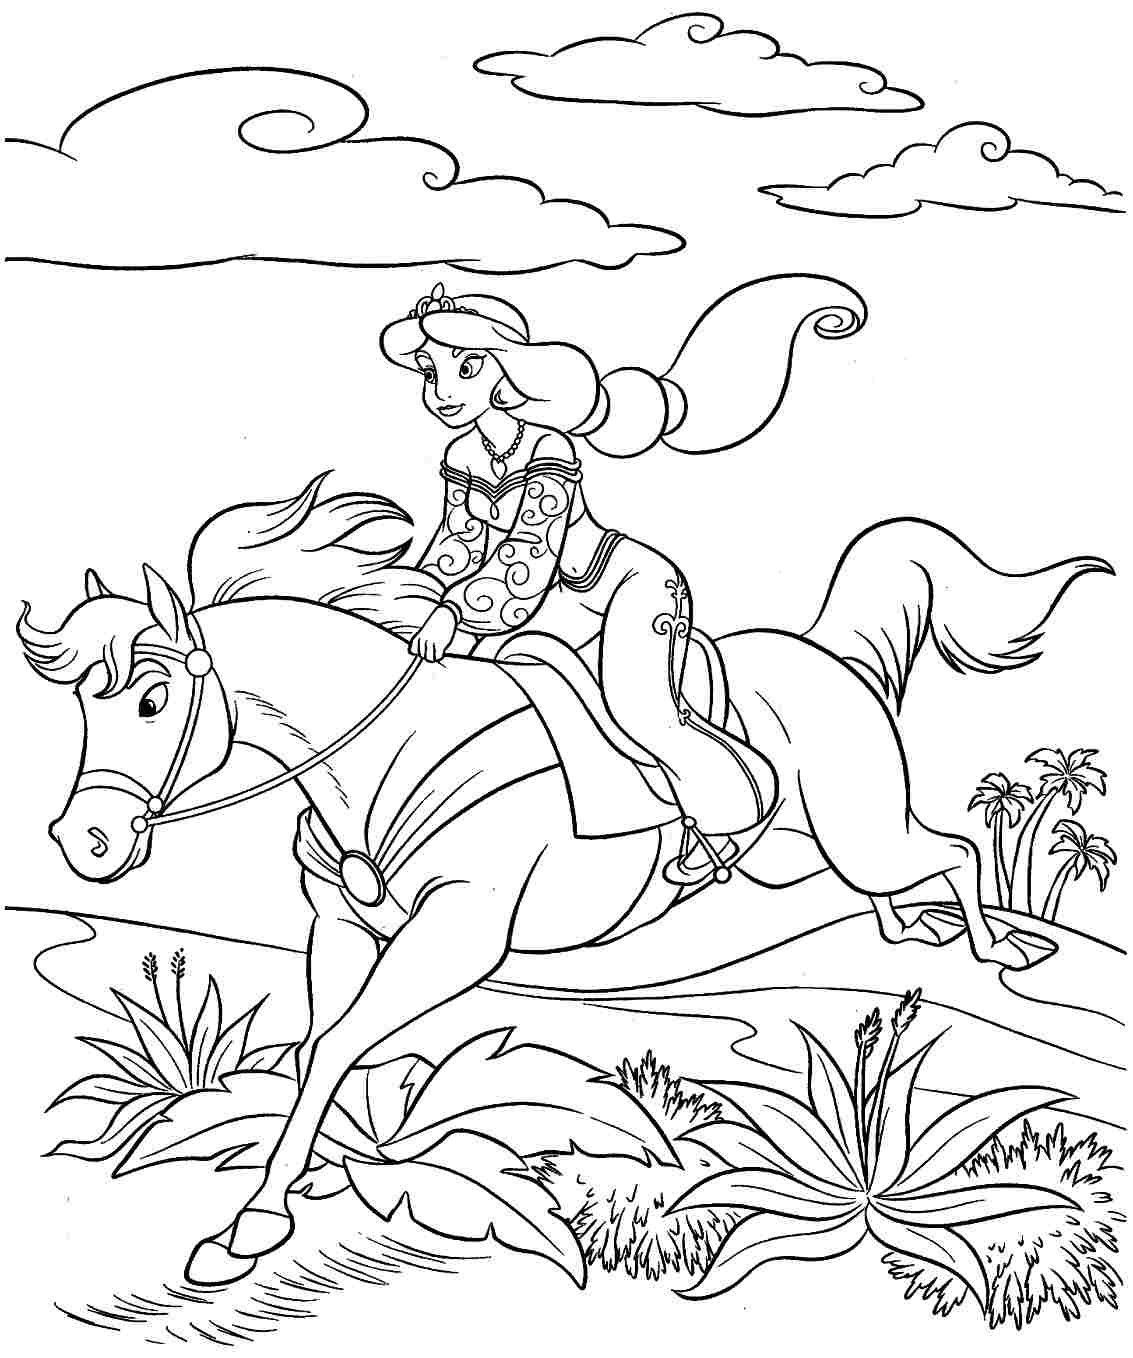 Princess with Horse Coloring Page